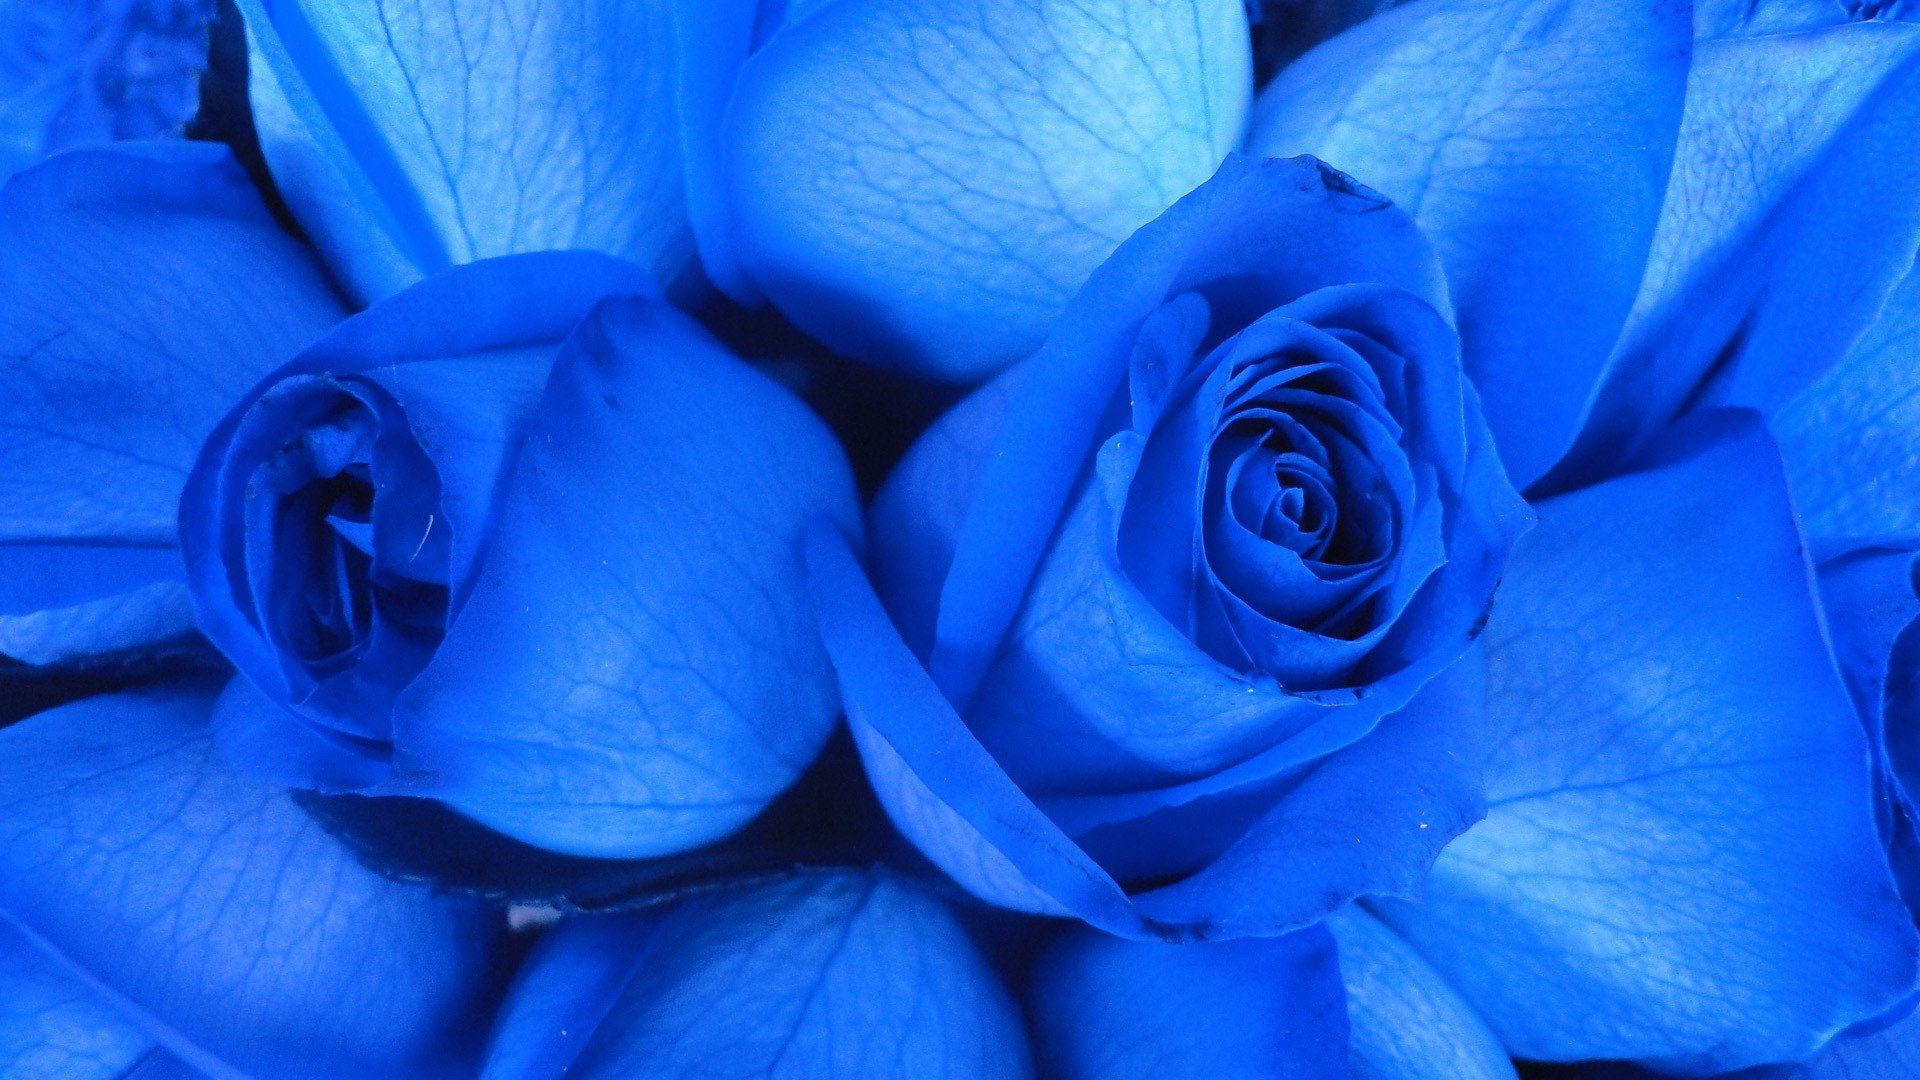 flowers, Roses, Blue, Rose Wallpapers HD / Desktop and Mobile Backgrounds